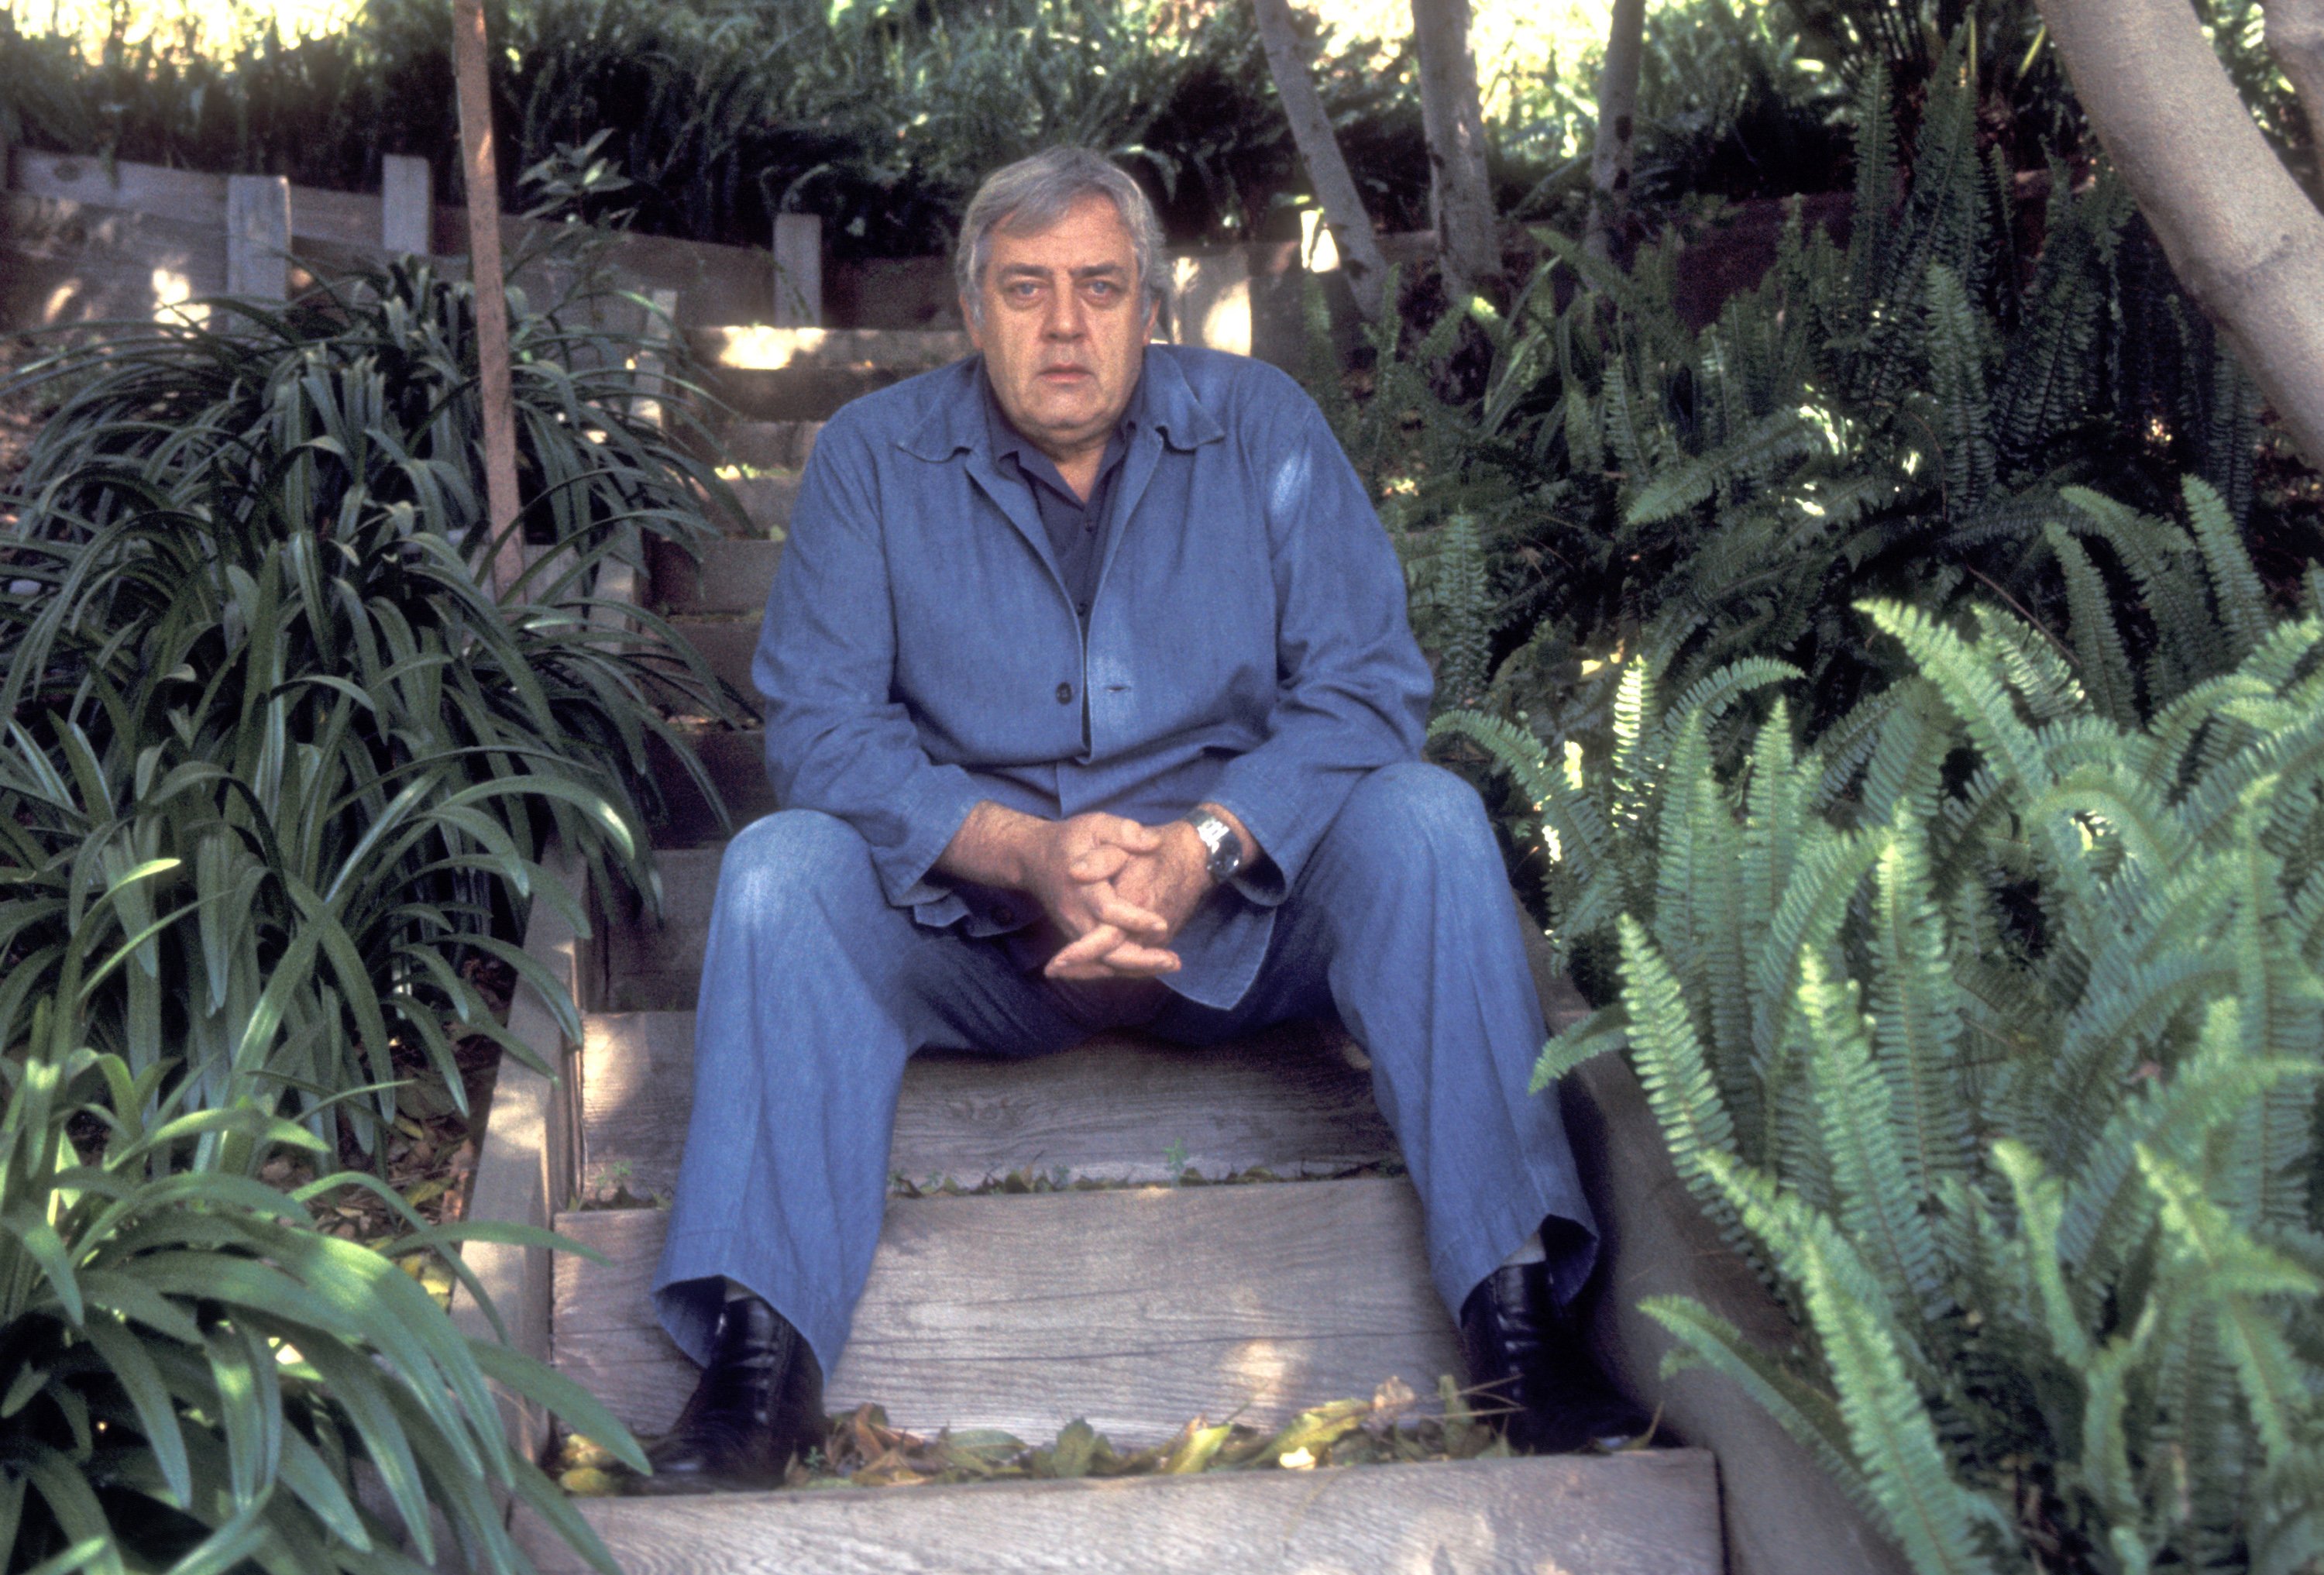 Actor Raymond Burr on March 11, 1977 in Hollywood, California. | Source: Getty Images